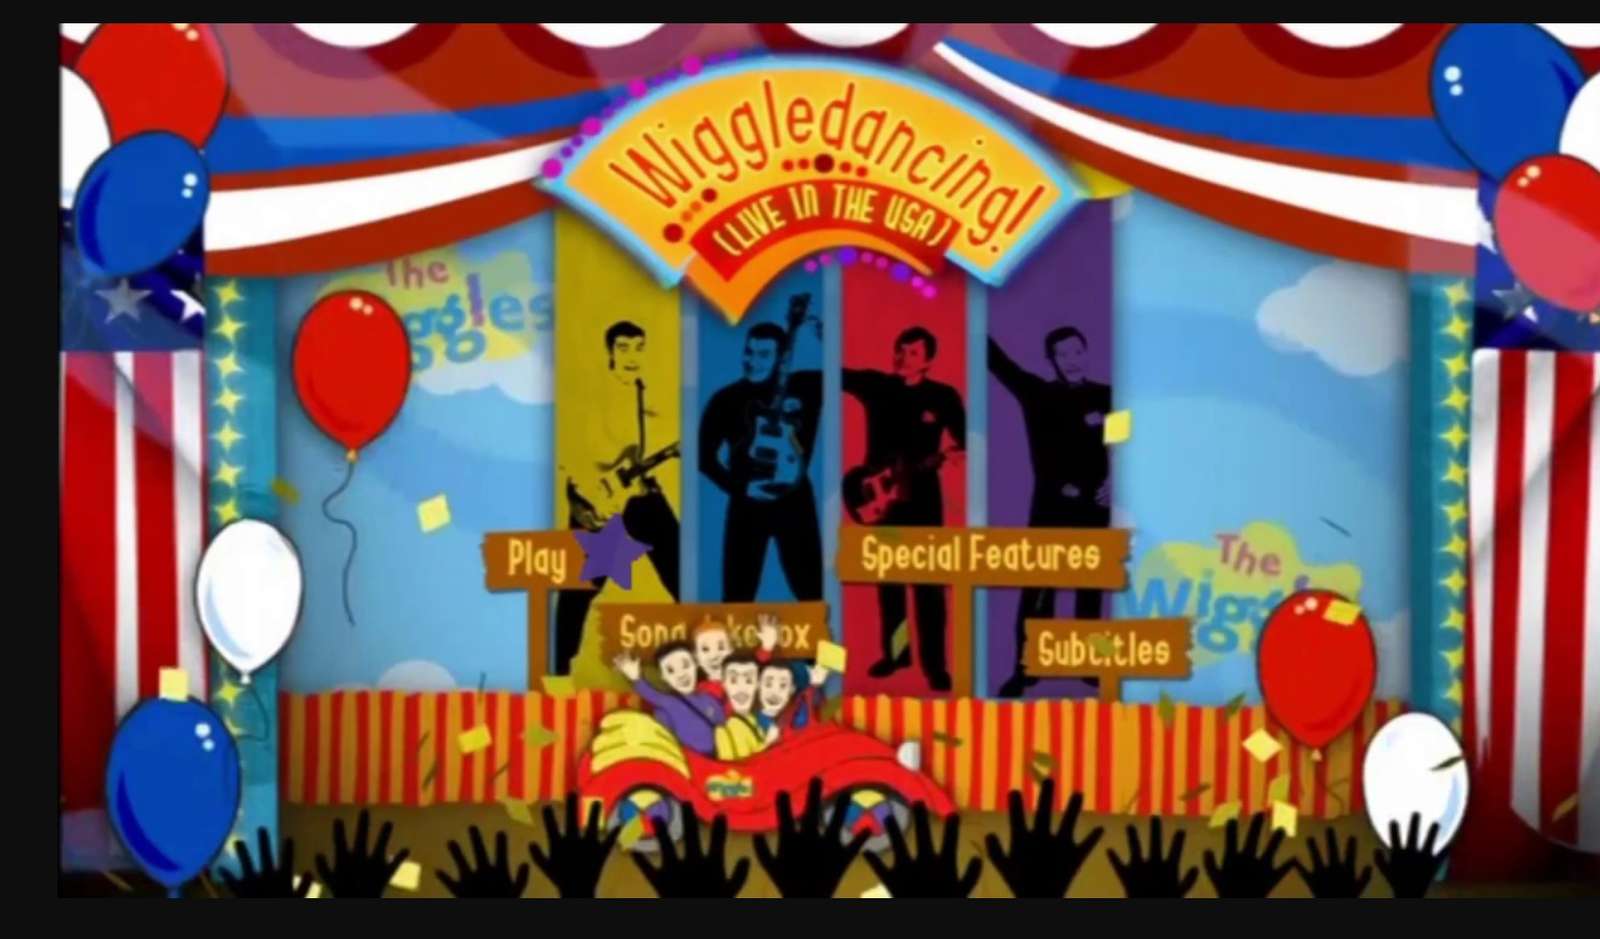 Wiggledancing Live In the Usa DVD Menu 2005 jigsaw puzzle online